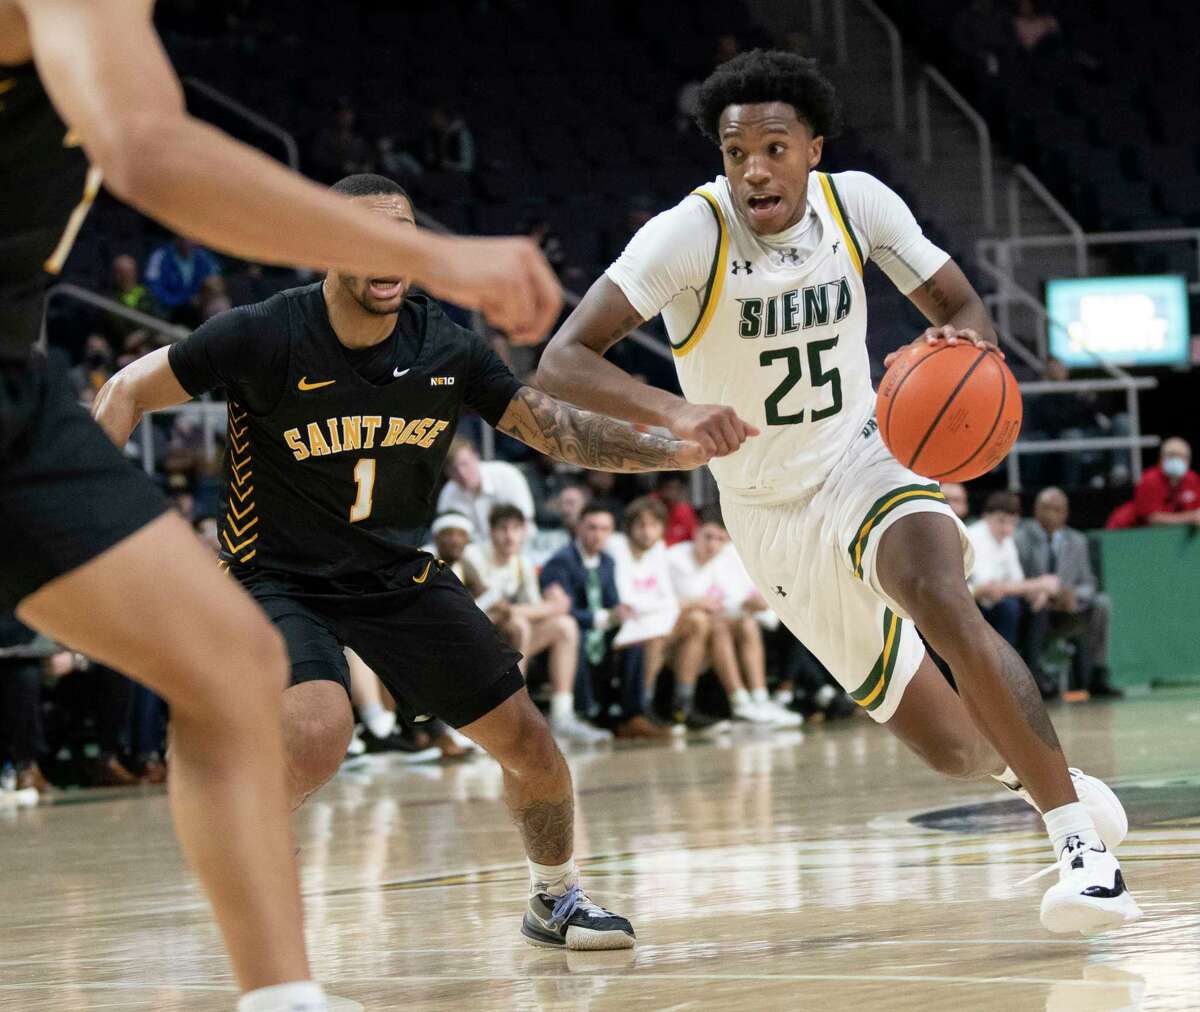 Siena’s Aidan Carpenter drives to the basket against The College of Saint Rose during an exhibition game at the Times Union Center on Monday, Oct, 25, 2021 in Albany, N.Y.